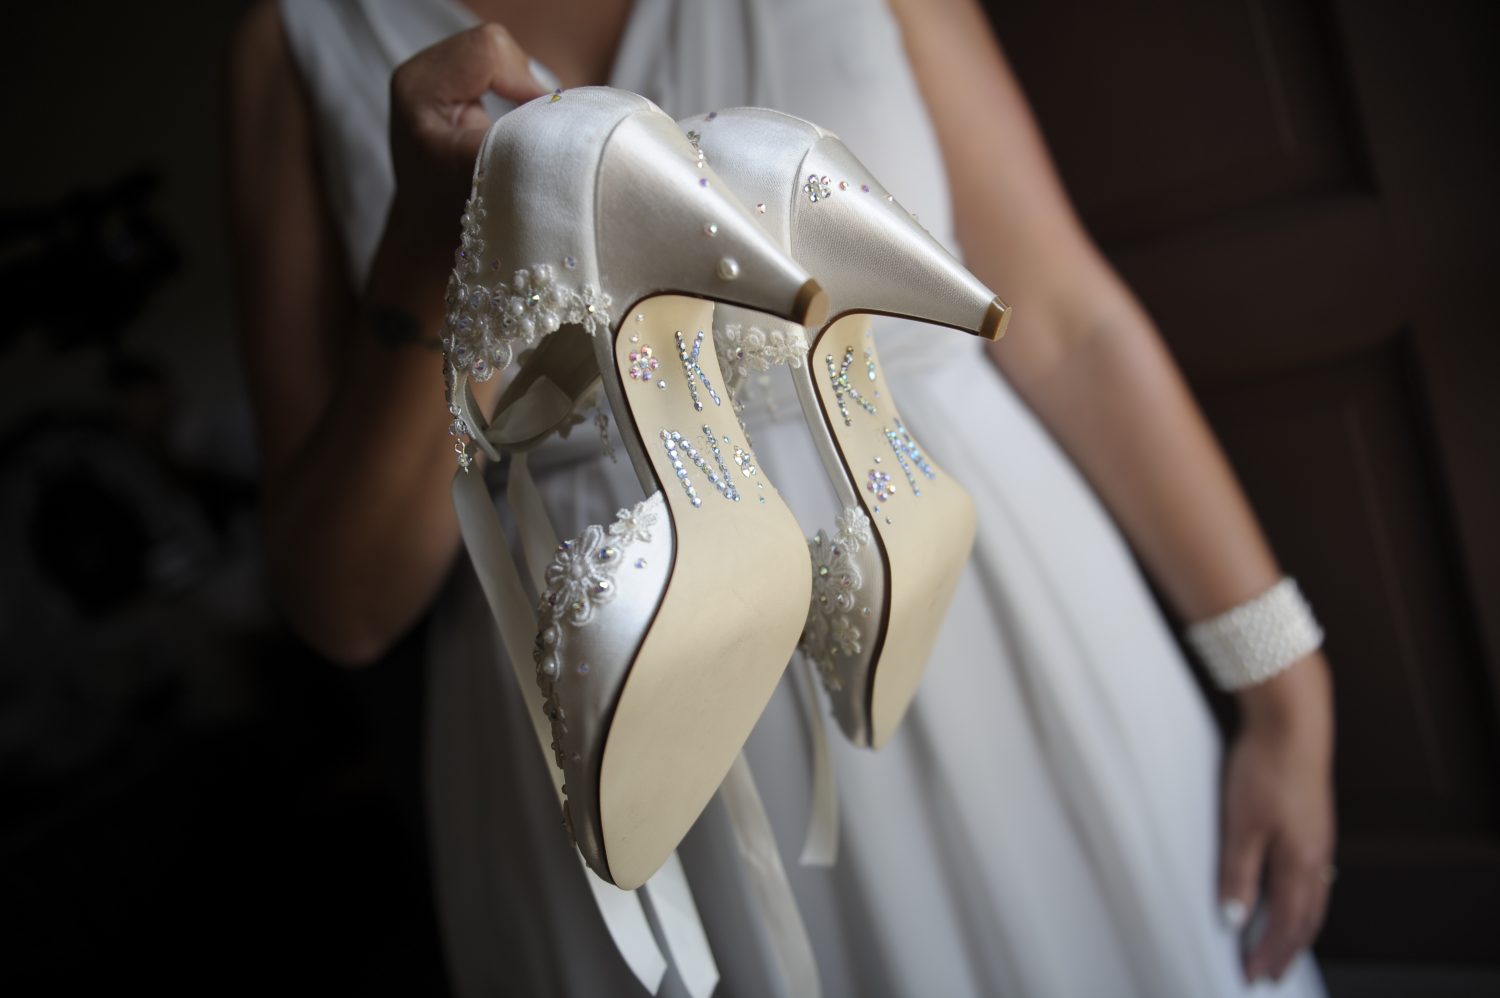 Decals and Messages for Weddings Shoes